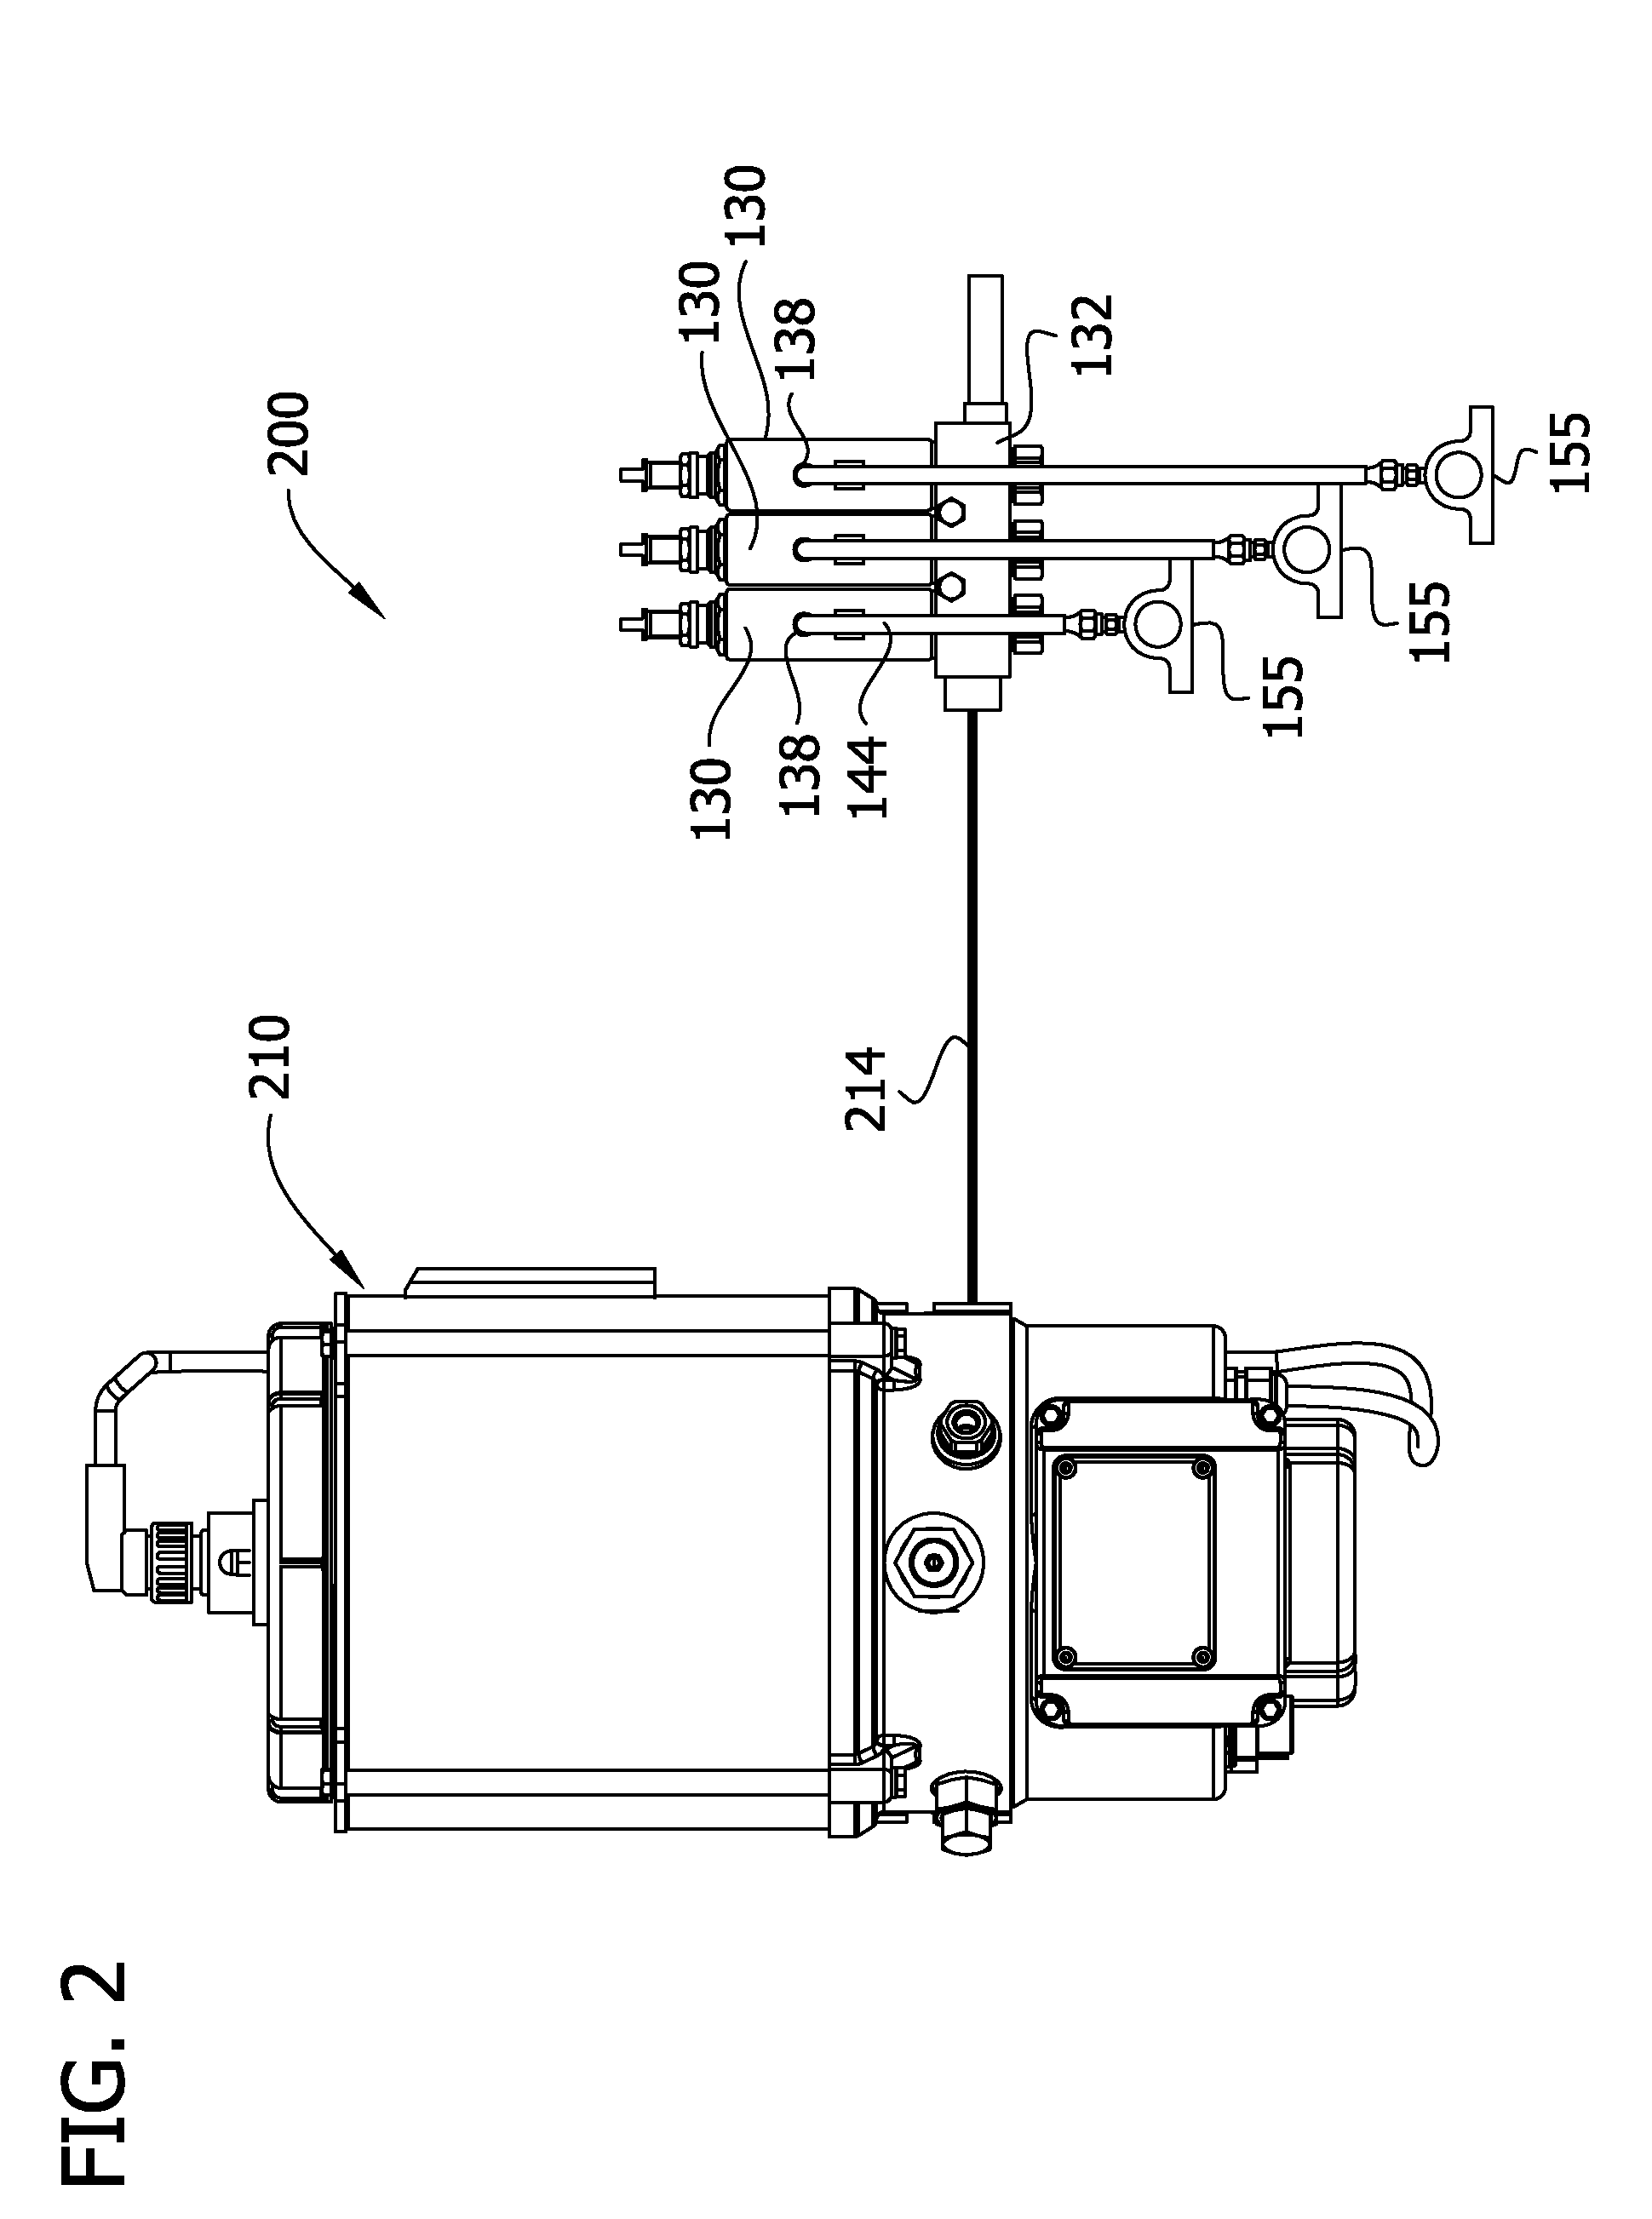 Pump having stepper motor and overdrive control